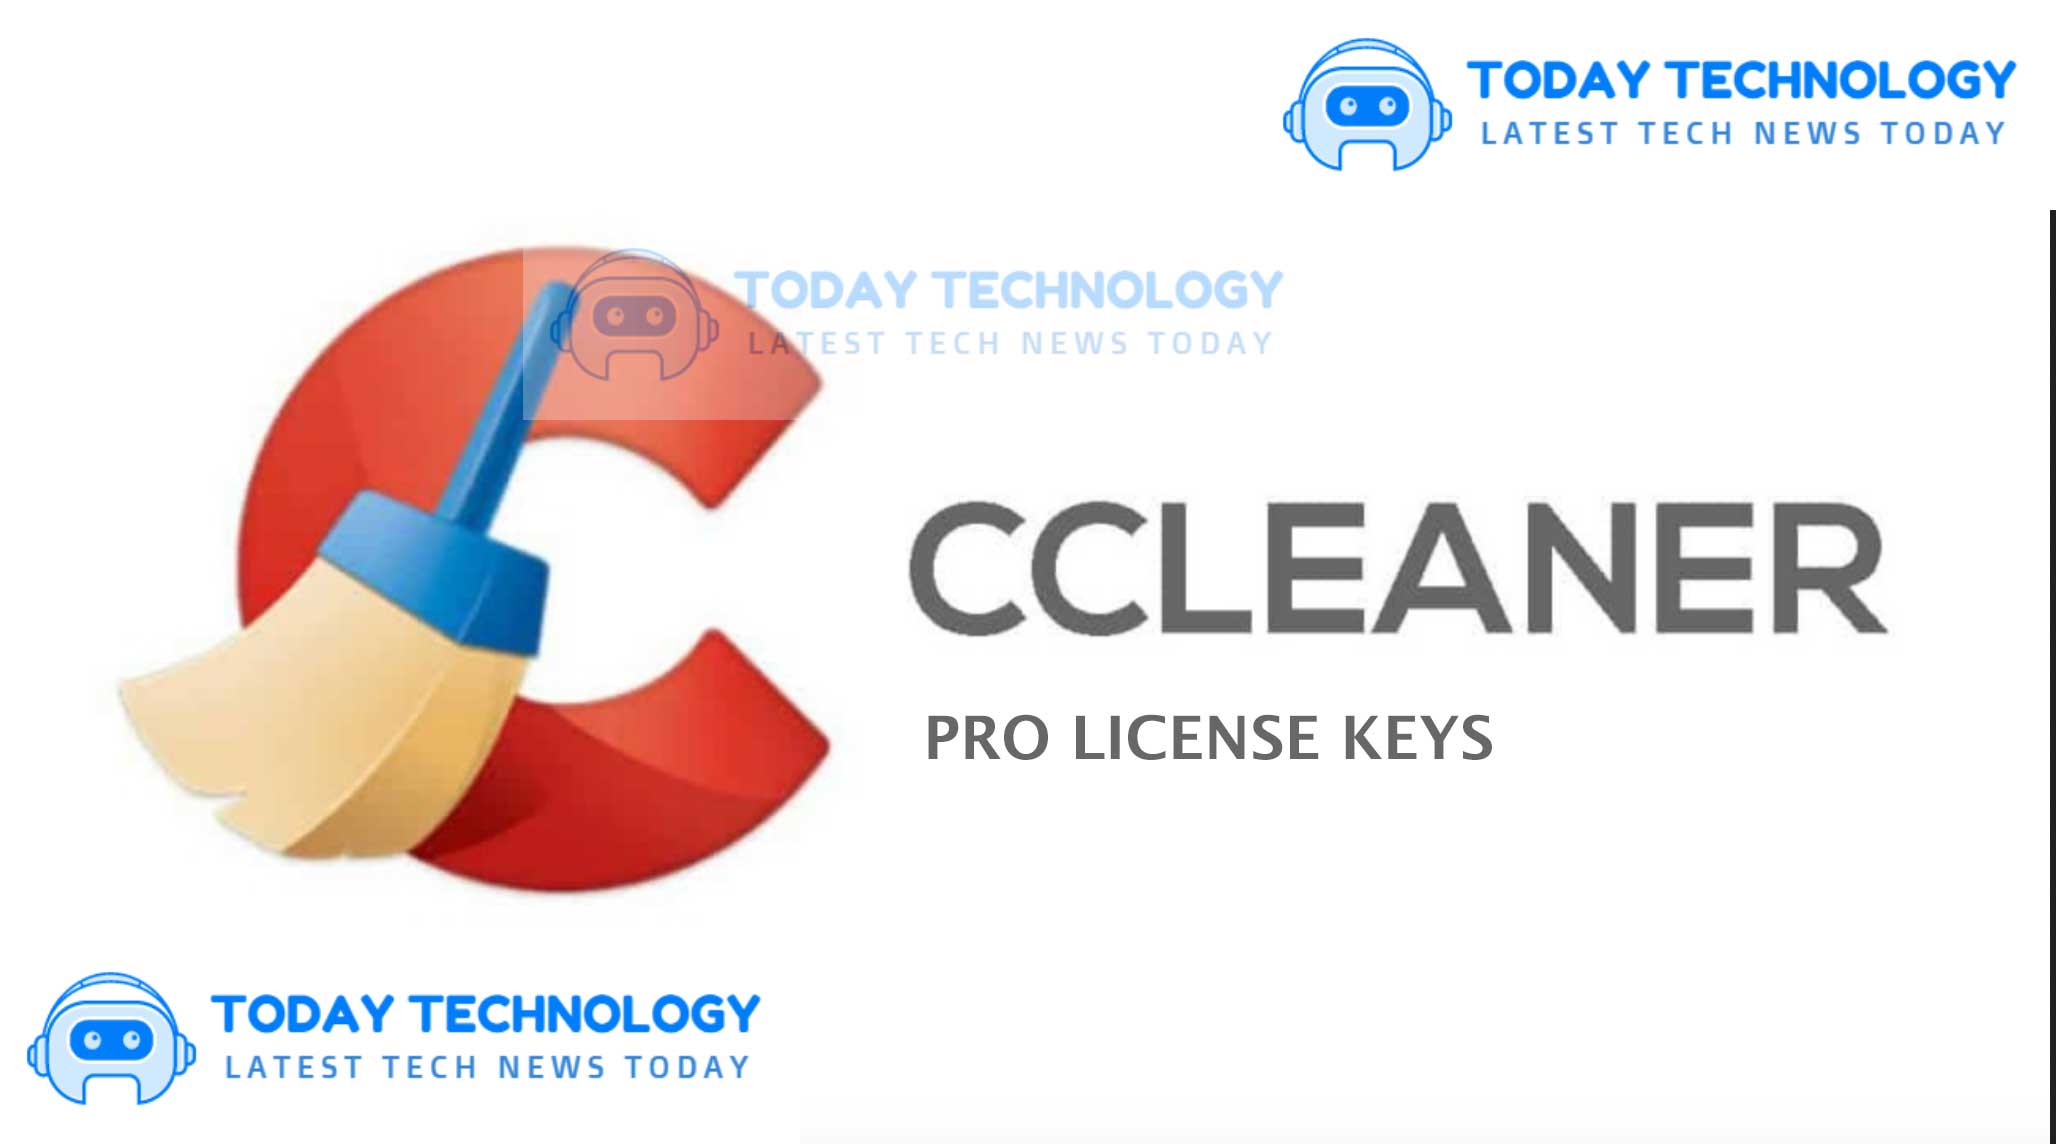 ccleaner download freemac